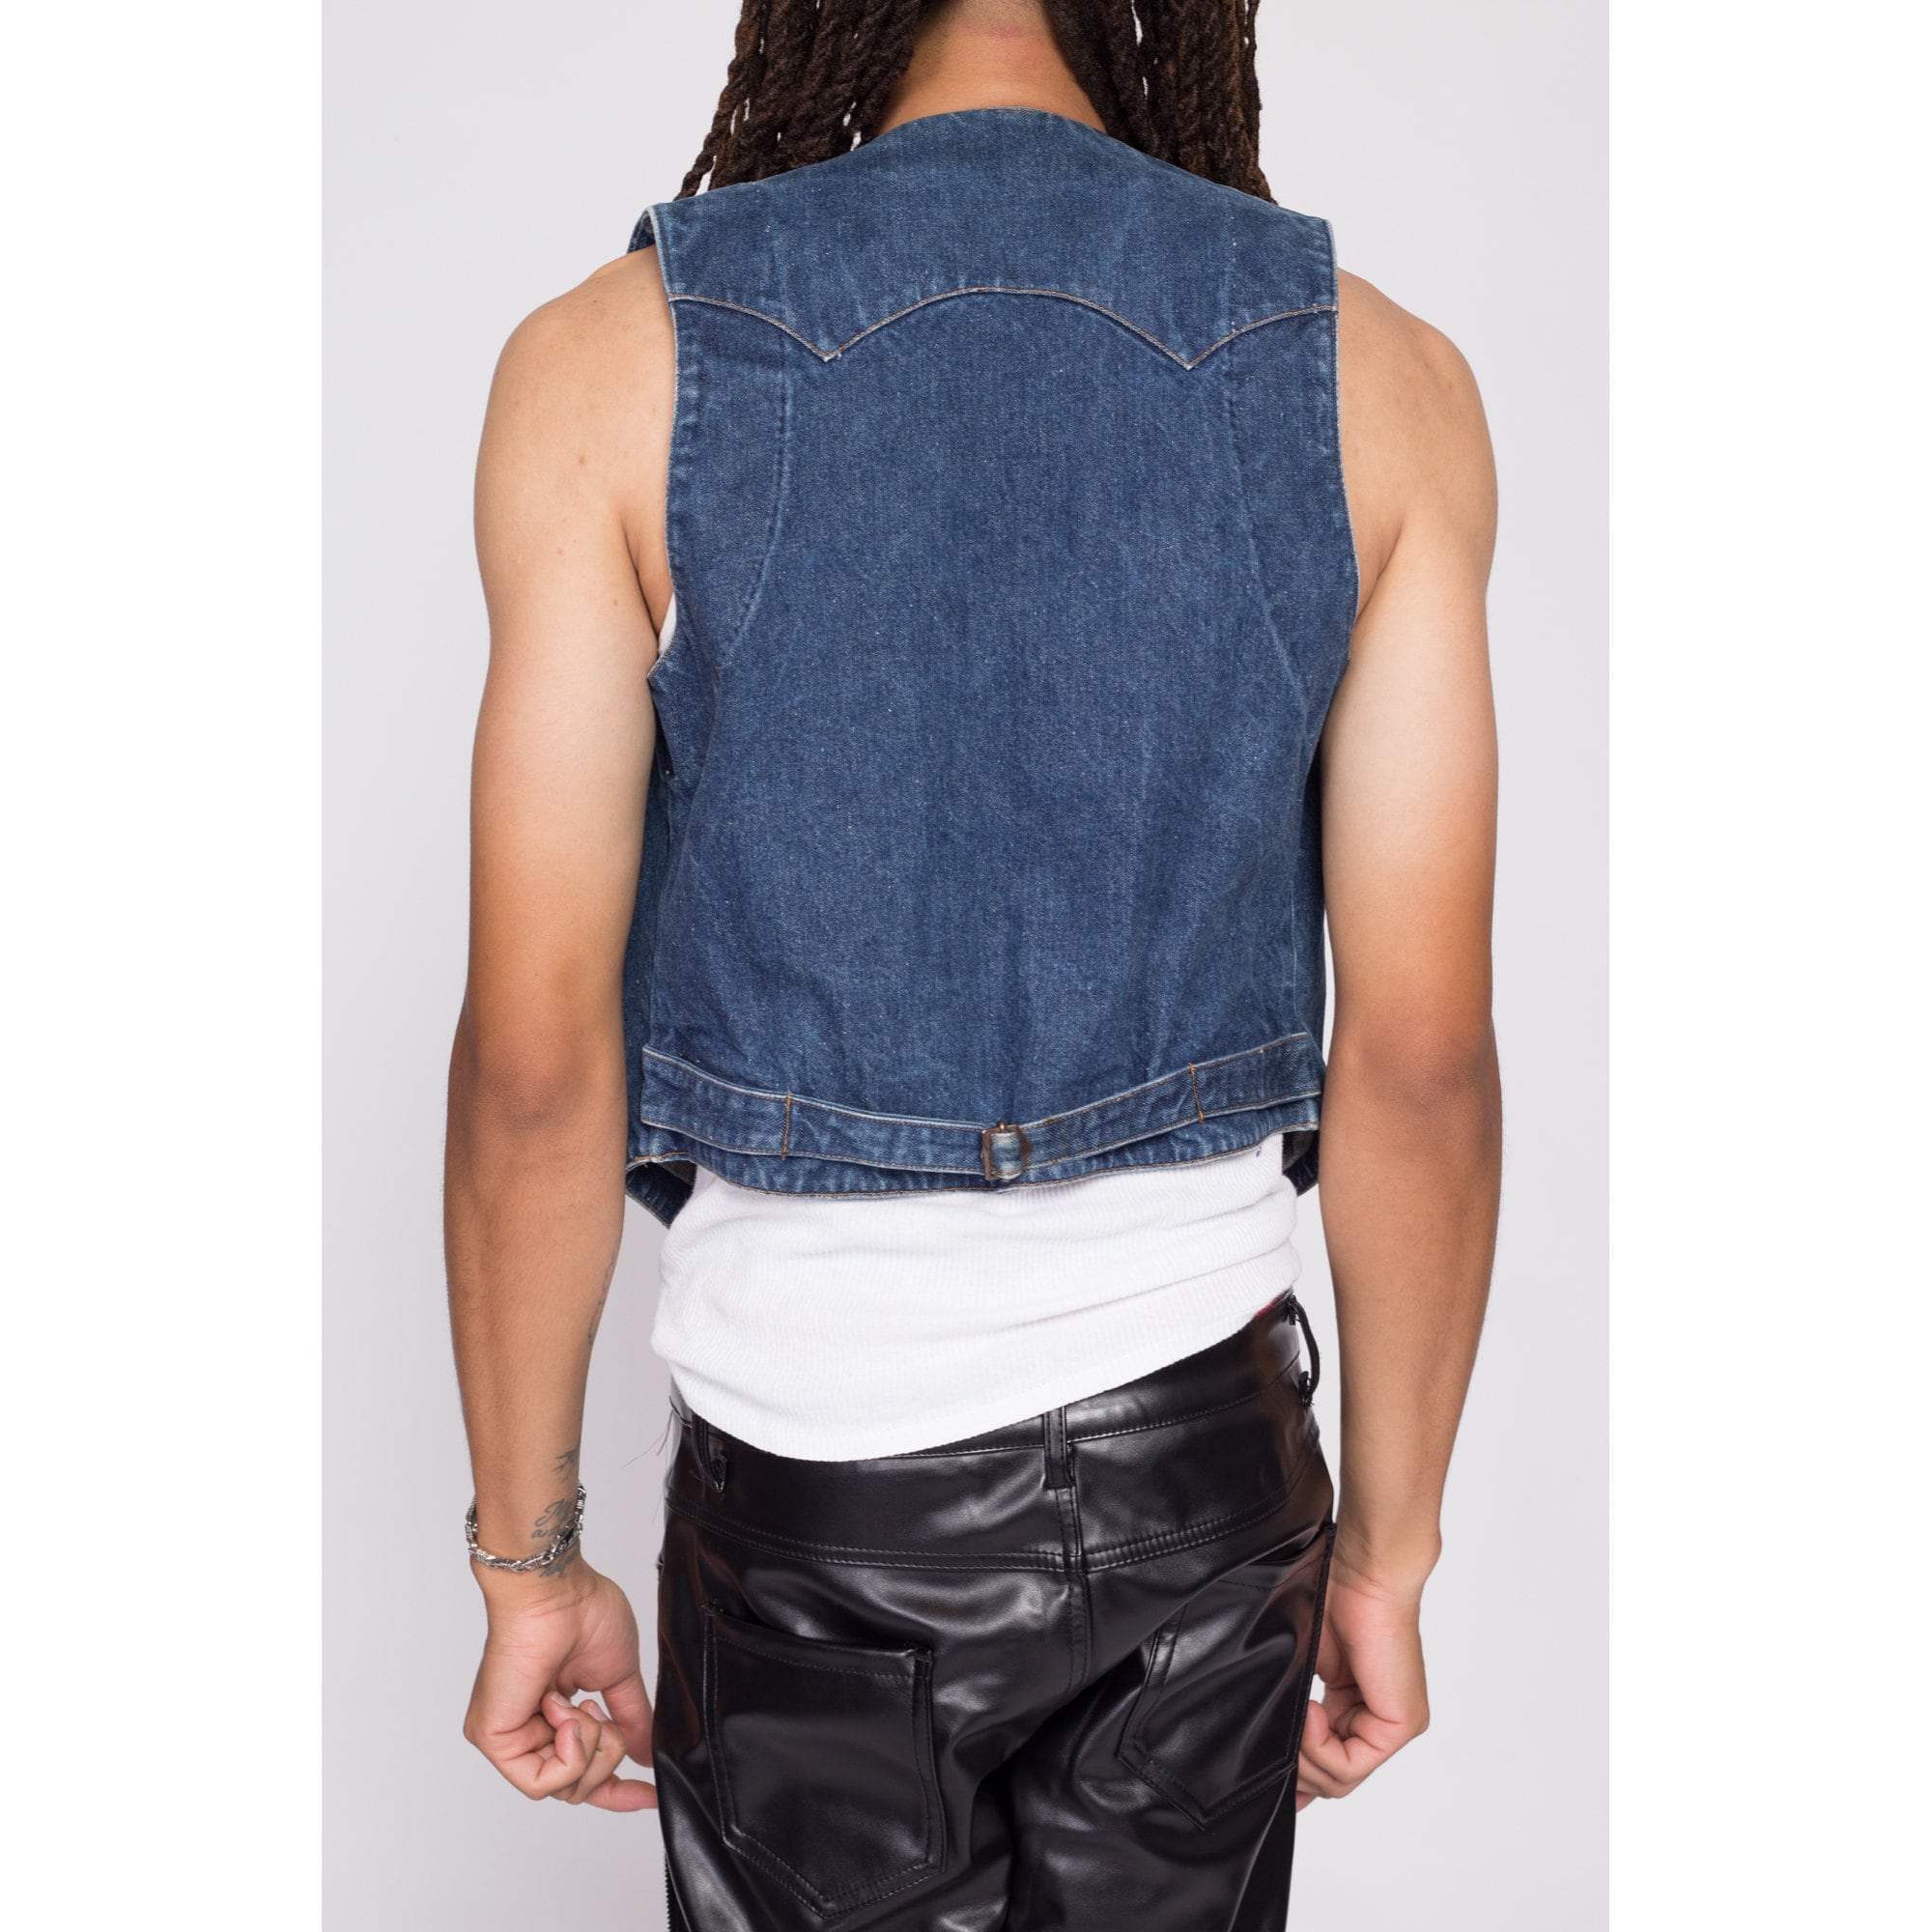 Denim Sleeveless Jacket for Men / Ripped Vest with Buttons